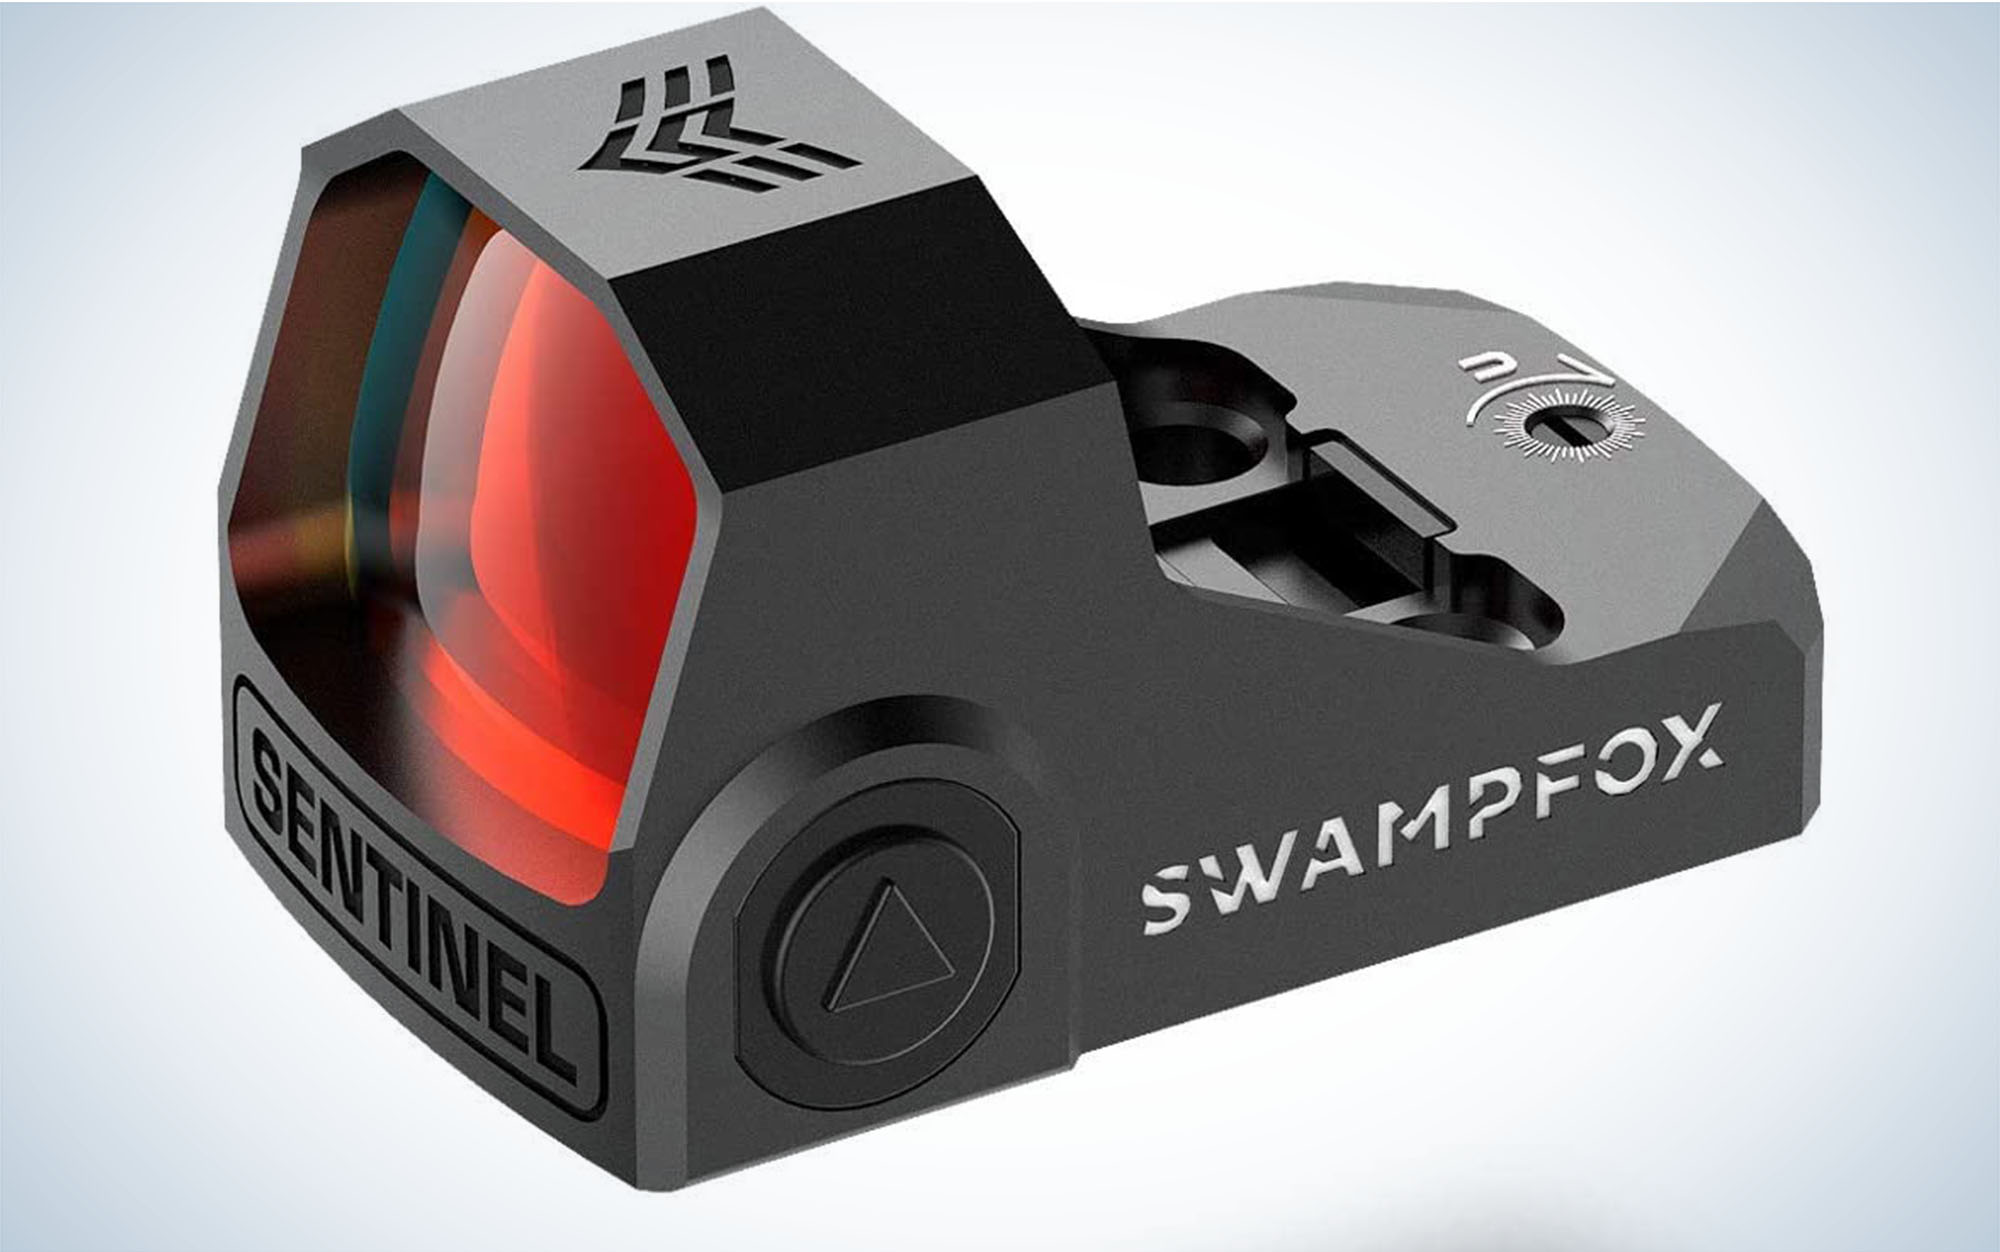 The Swampfox Sentinel is one of the best red dot sights for turkey hunting.